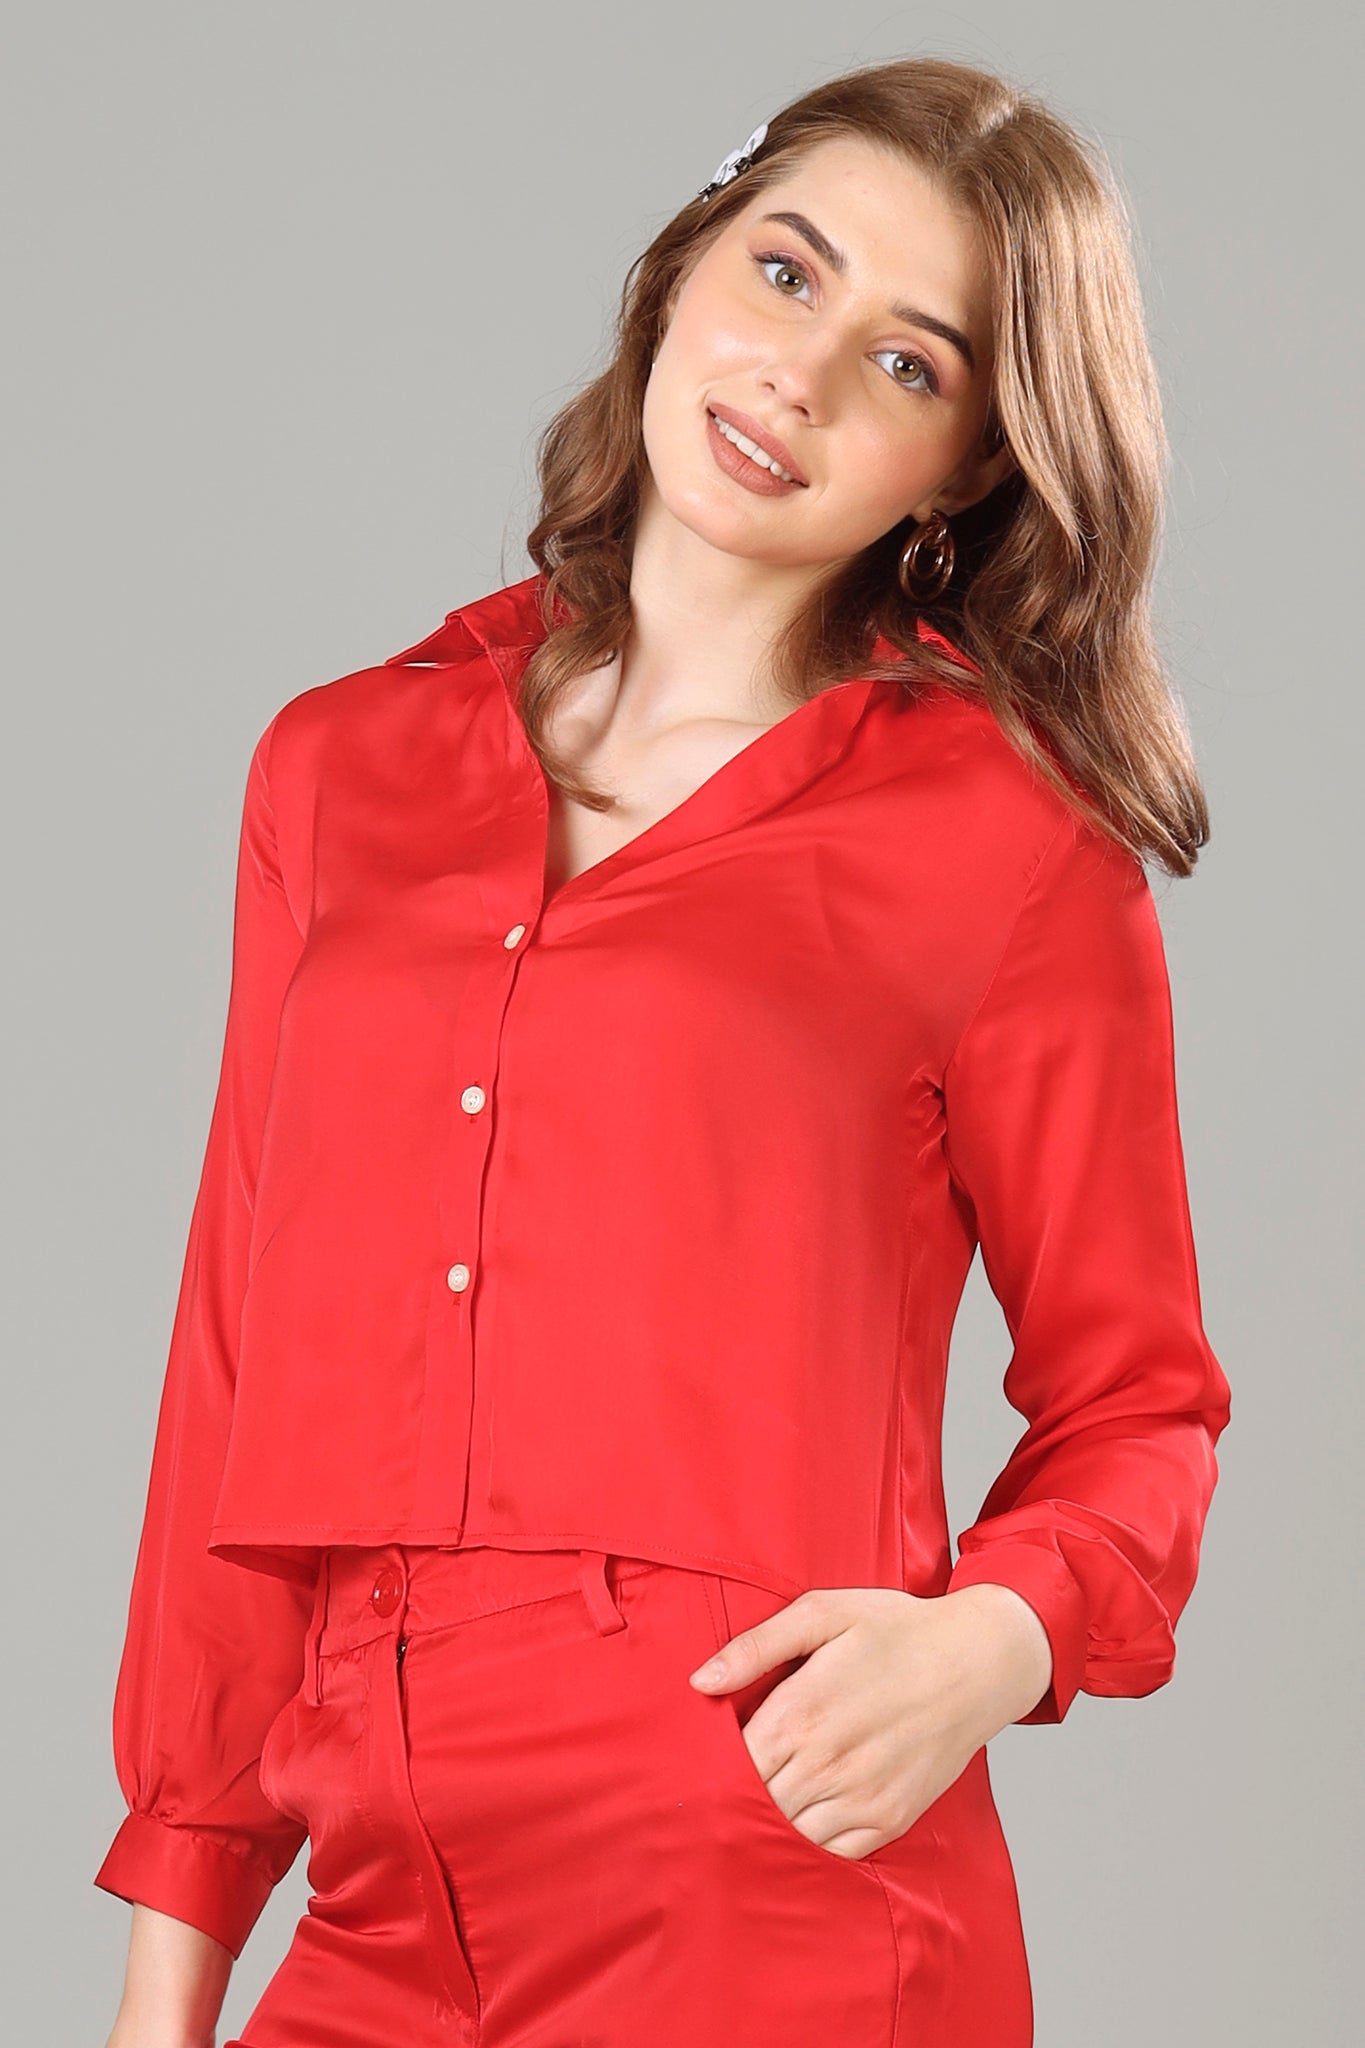 Romantic Red Cropped Shirt For Women